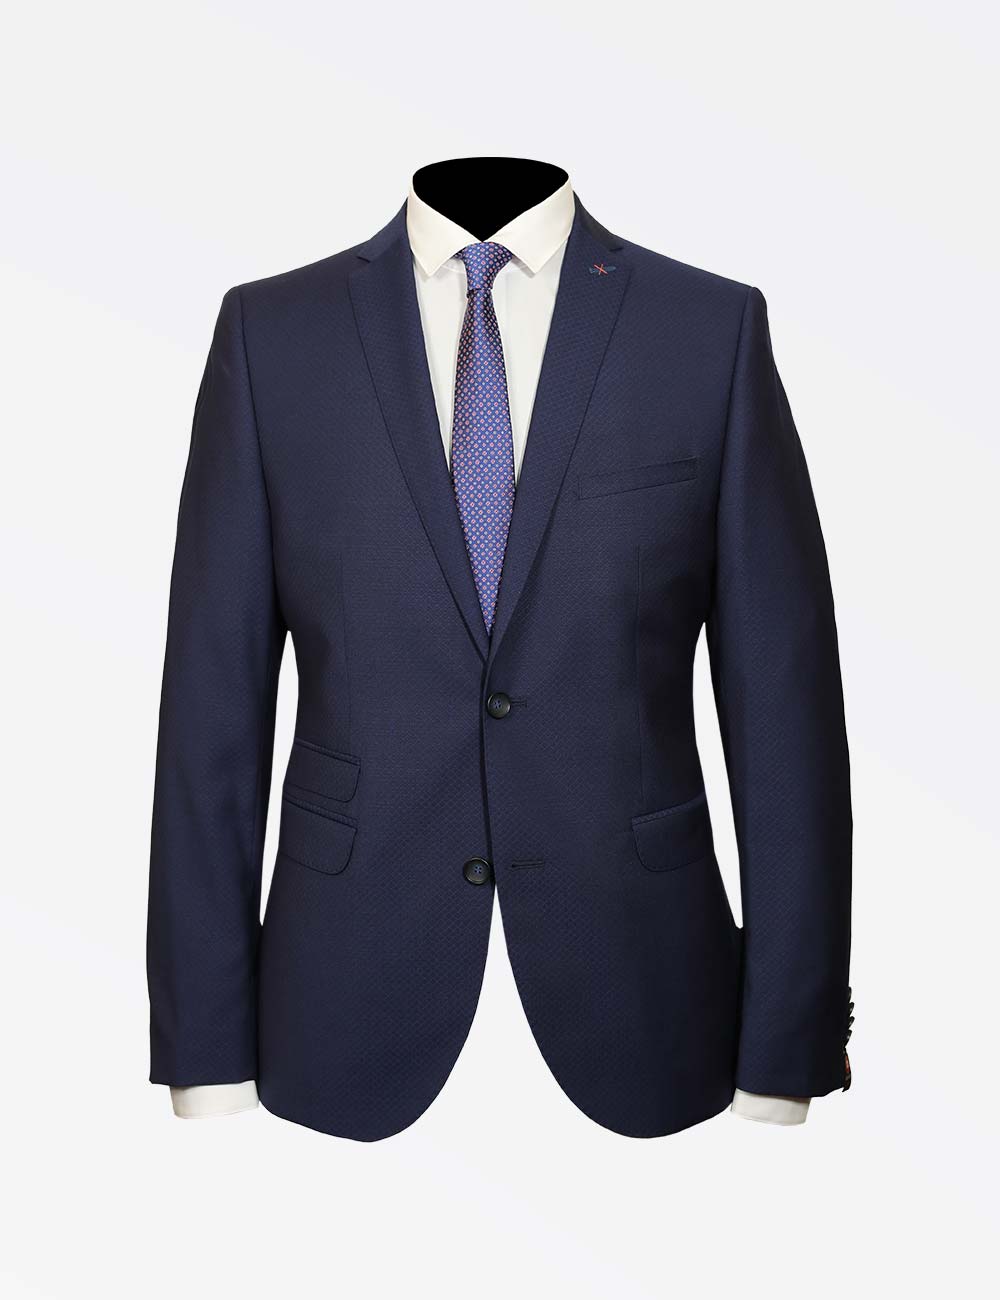 Club of Gents Business Suit -Navy Patterned Color